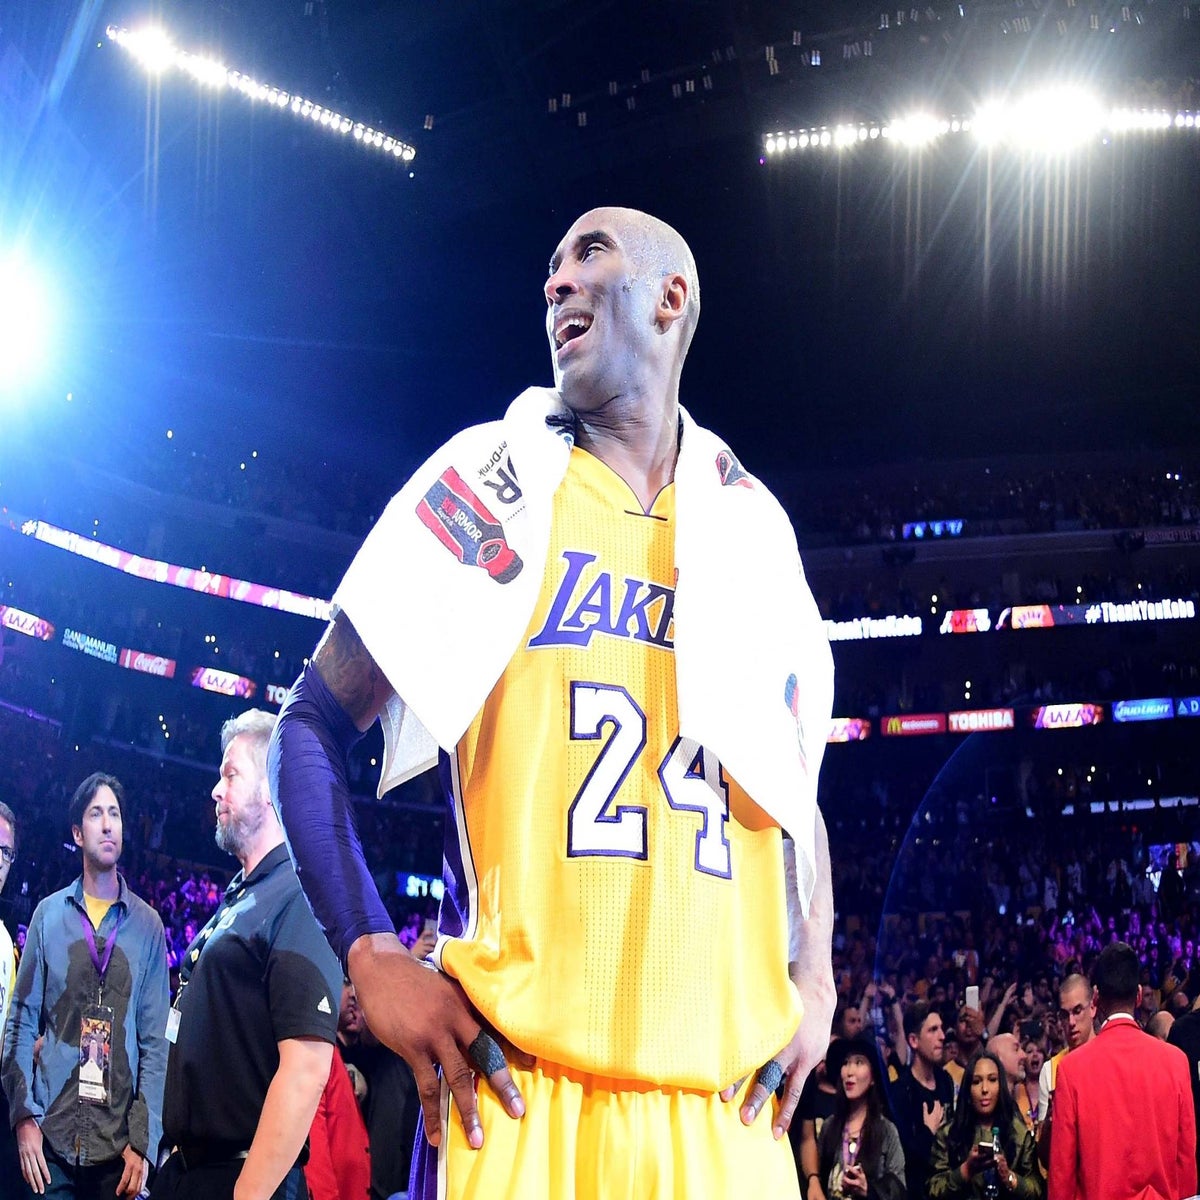 Kobe Bryant explained how No. 8 and No. 24 were two different people